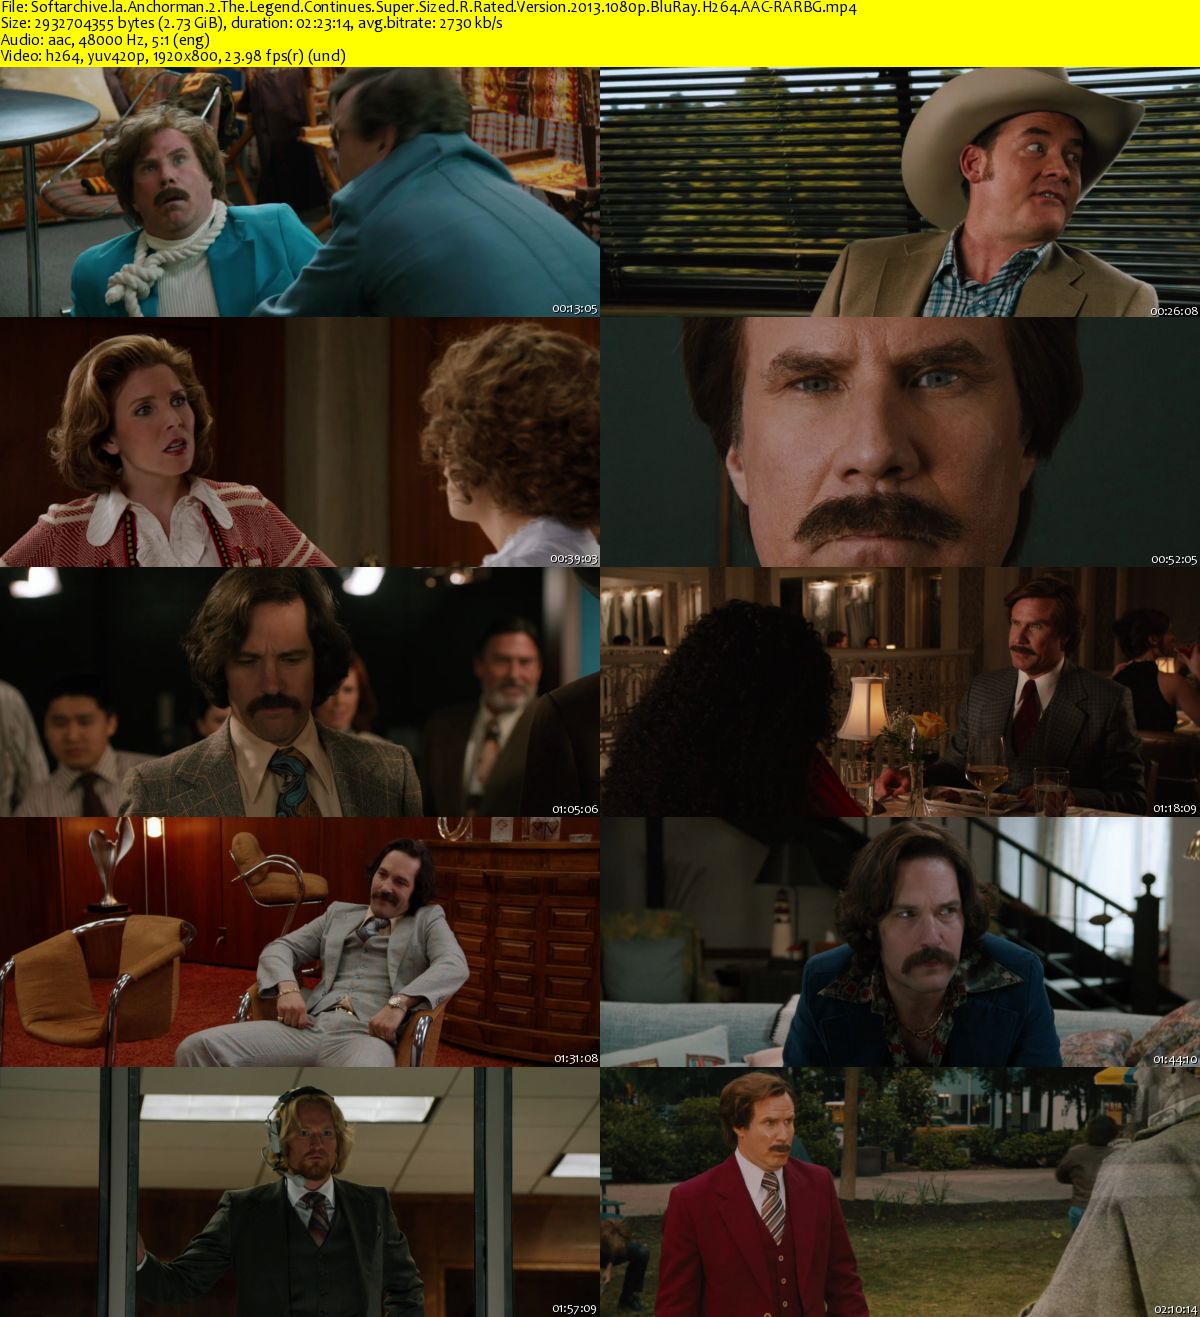 Watch Anchorman 2: The Legend Continues 2013 Full HD